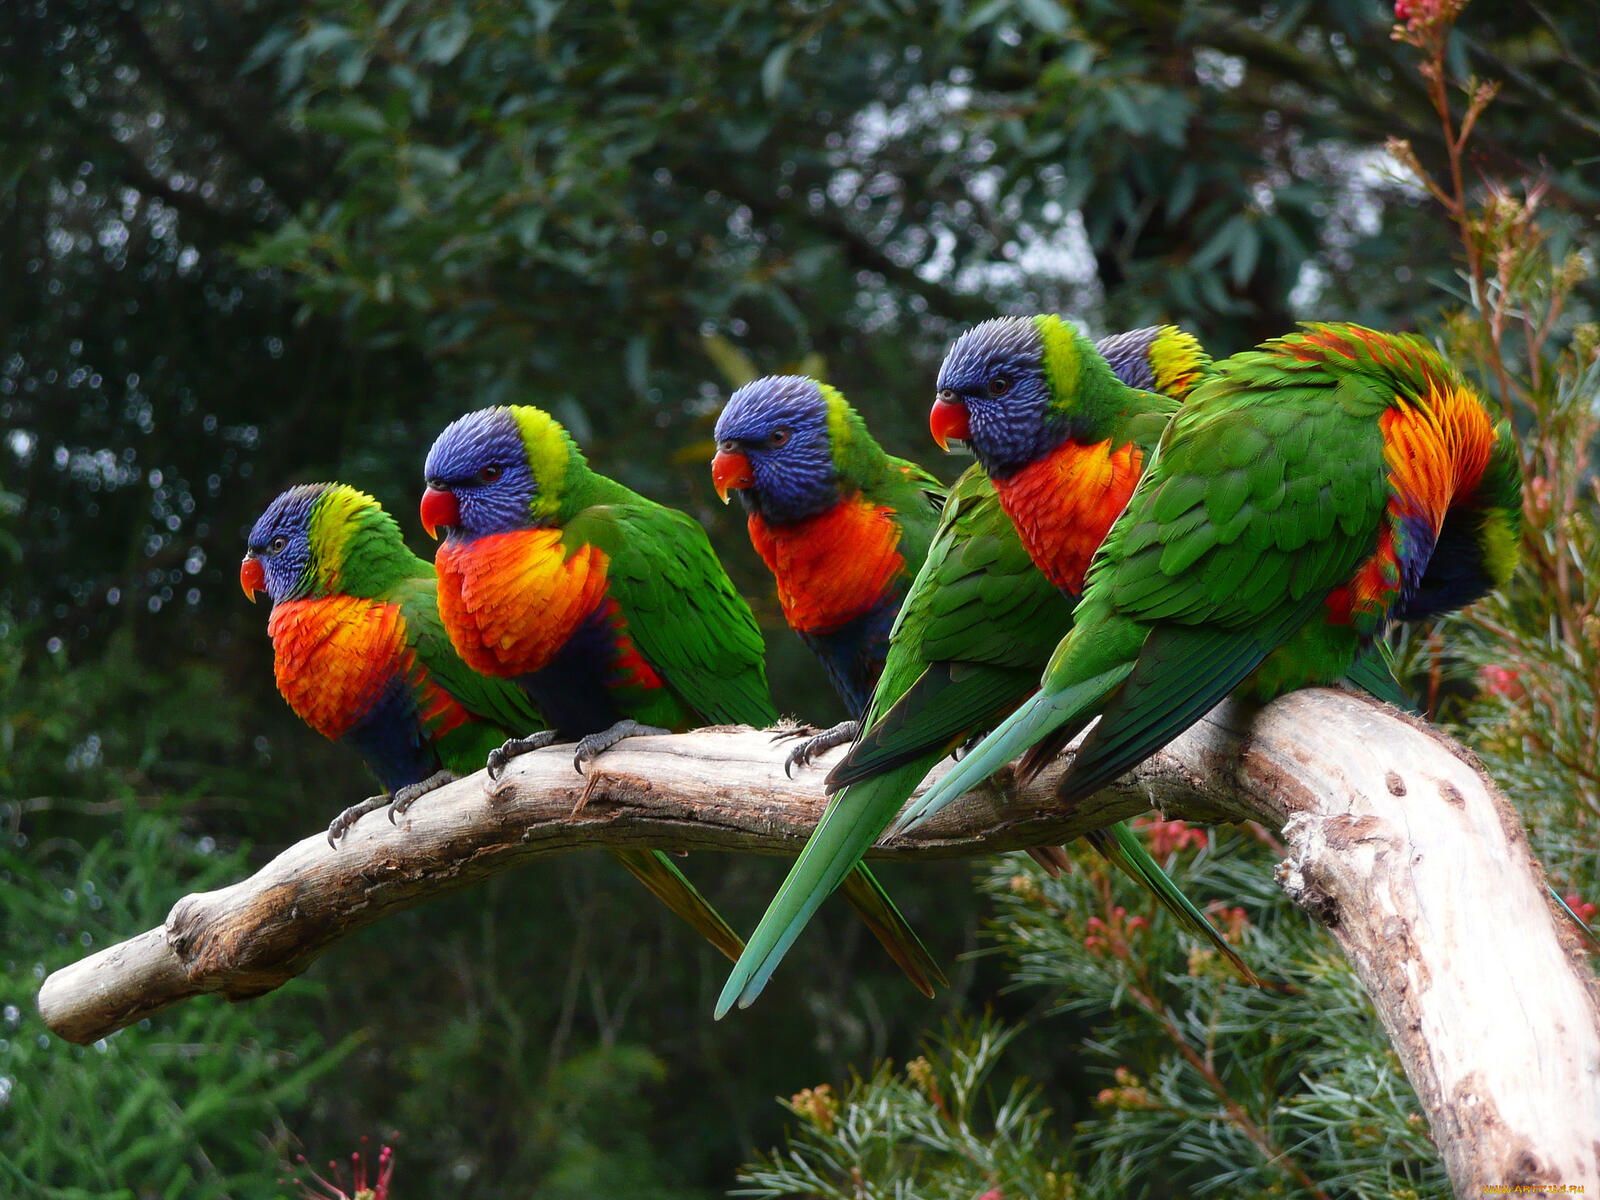 Many colored parrots gathered on one branch